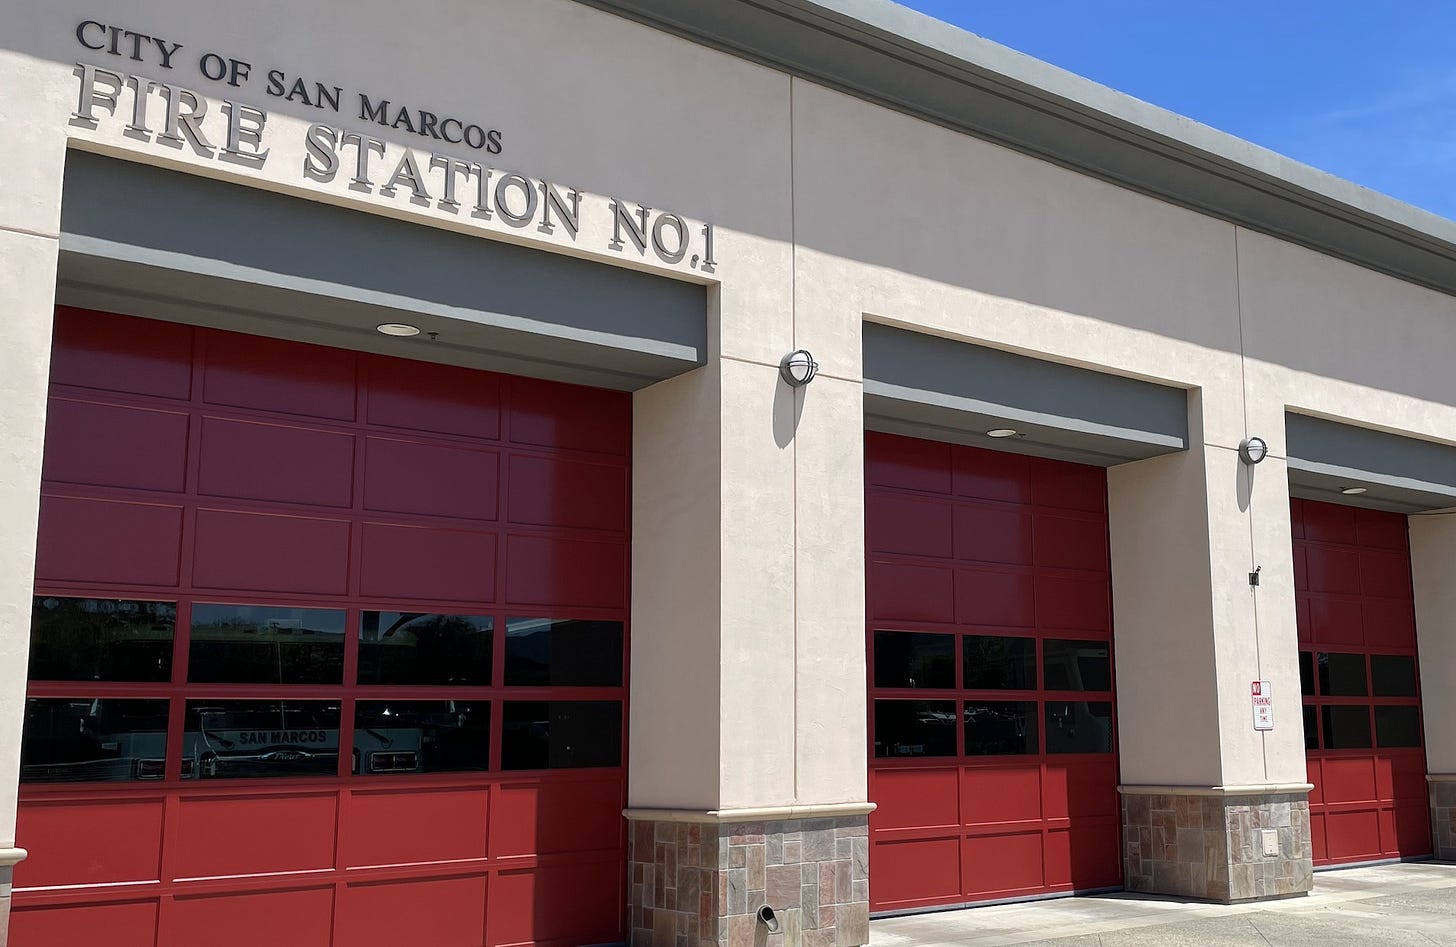 The San Marcos Fire Department is hopeful to pass a citywide one-cent sales tax increase to help pay for building a fifth fire station in the northwest part of the city. Steve Puterski photo